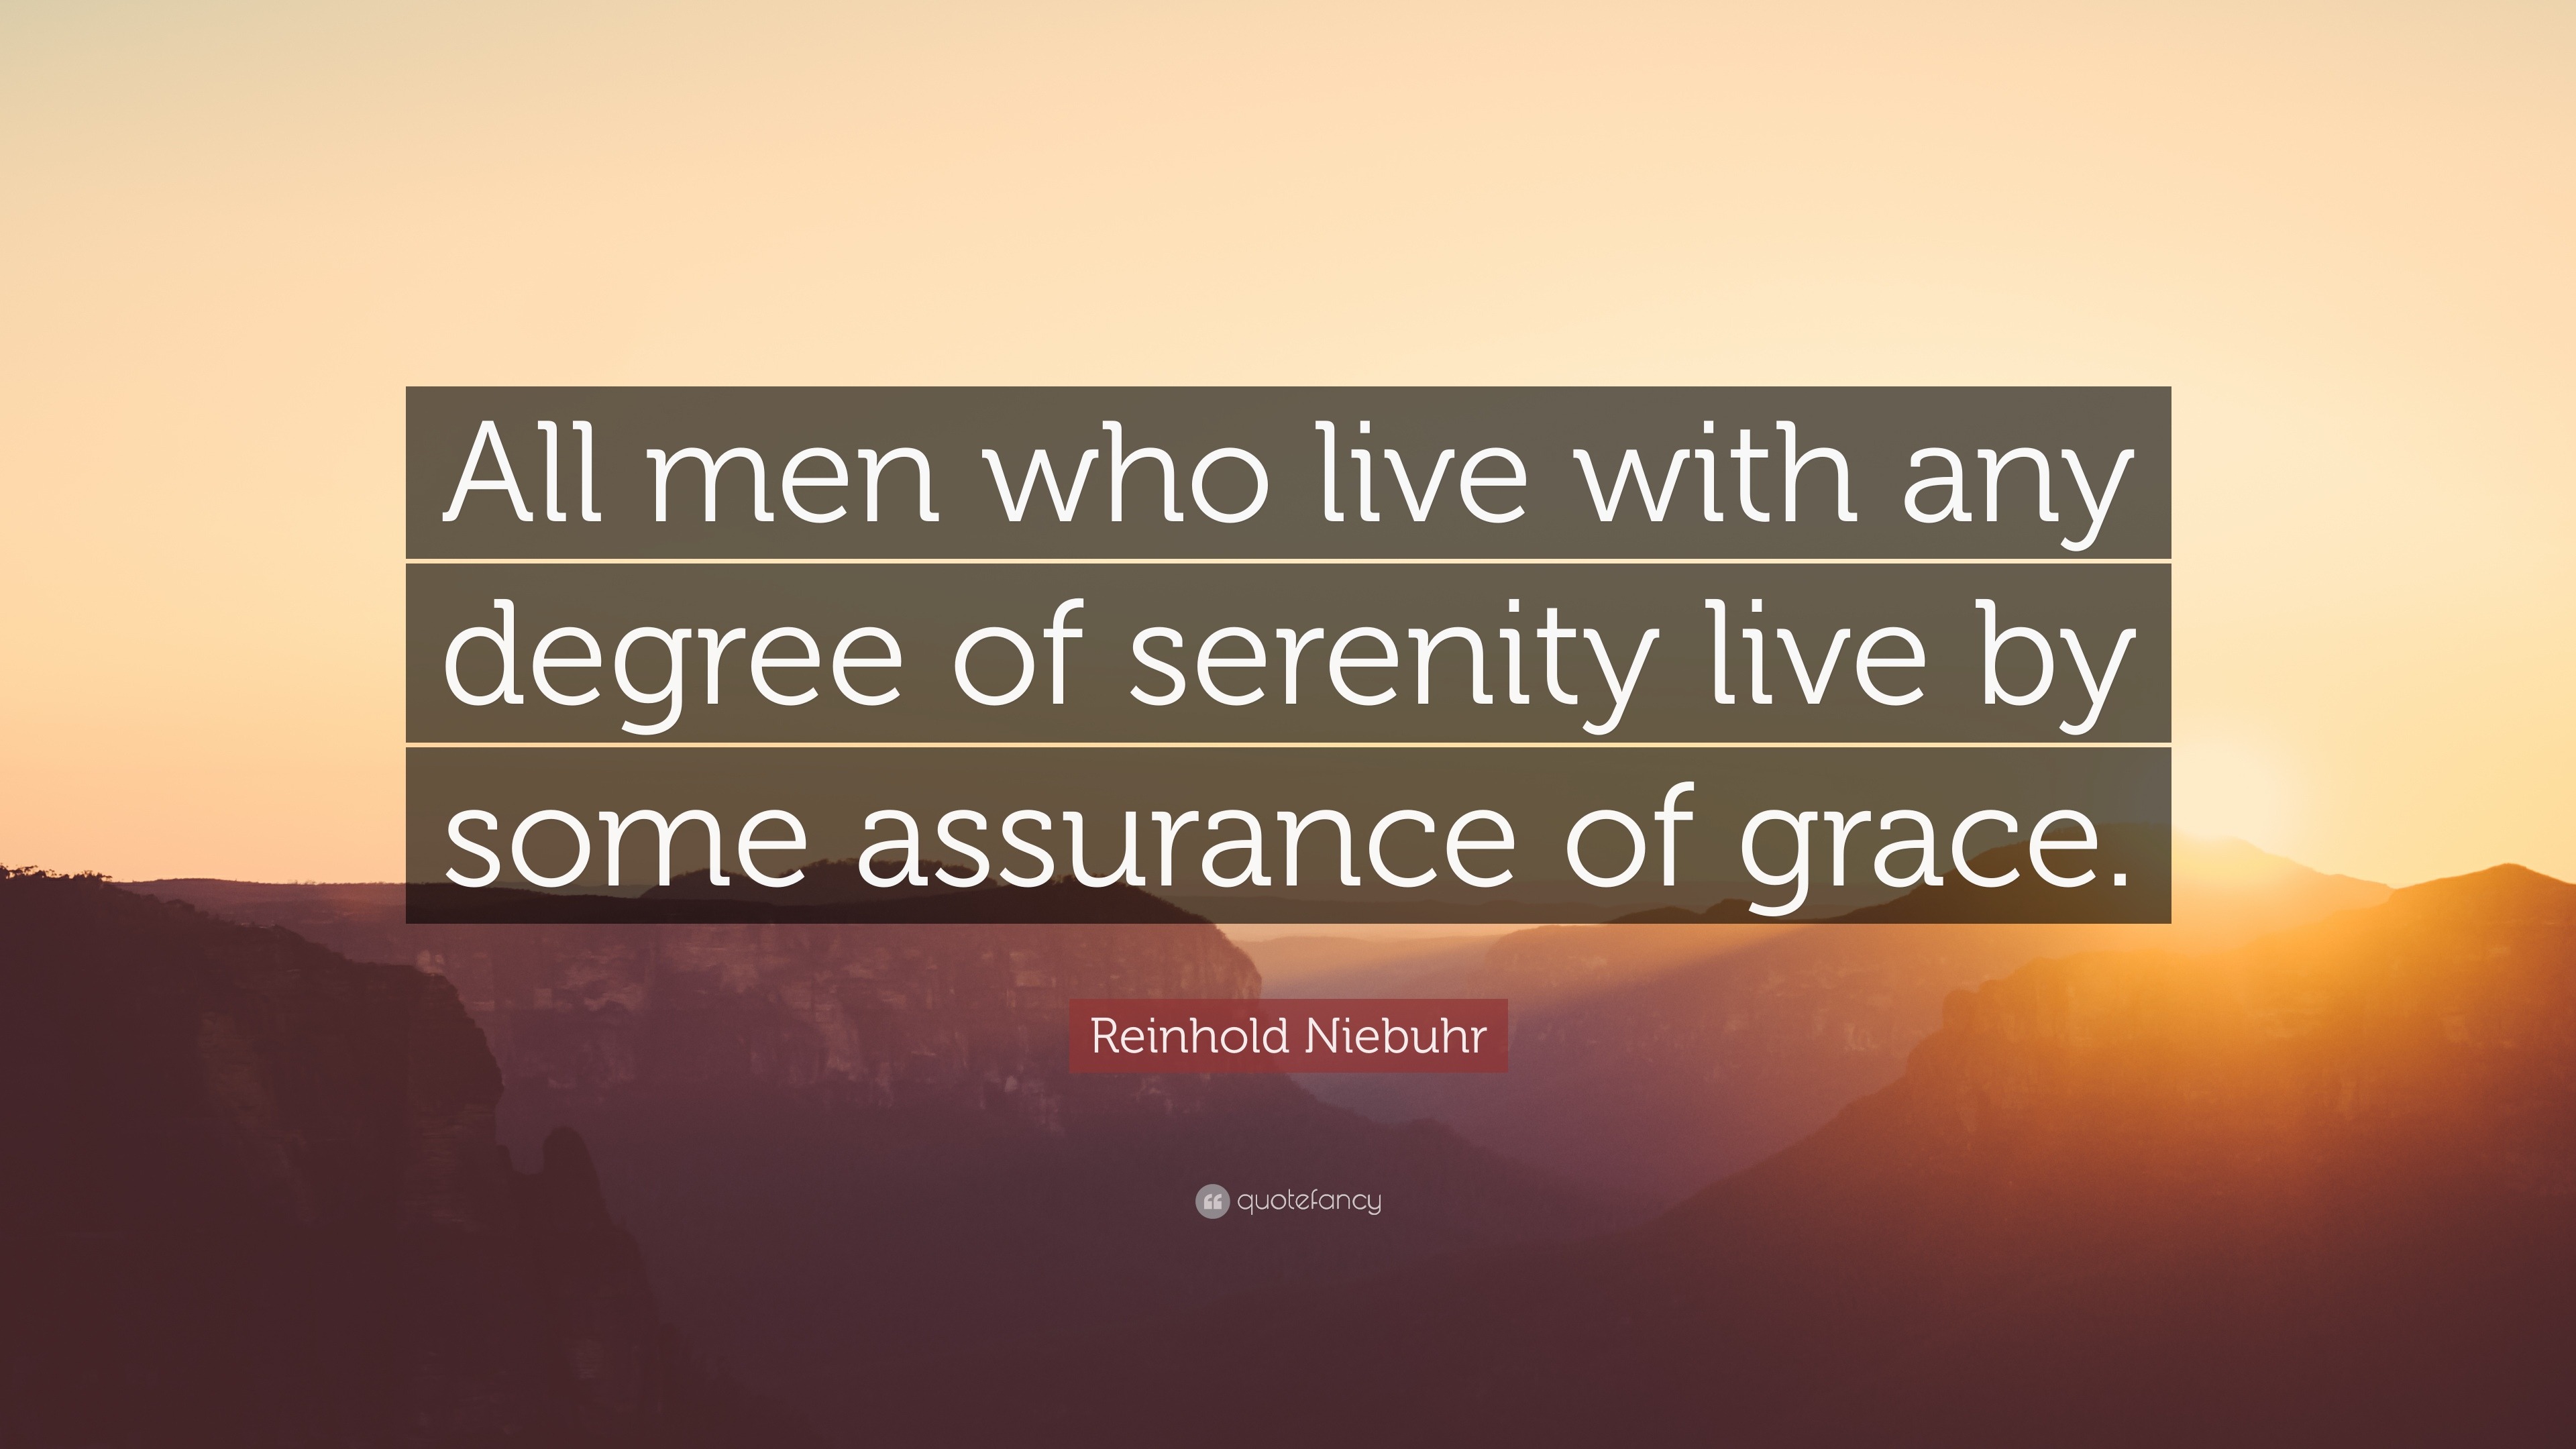 Reinhold Niebuhr Quote: “All men who live with any degree of serenity live  by some assurance